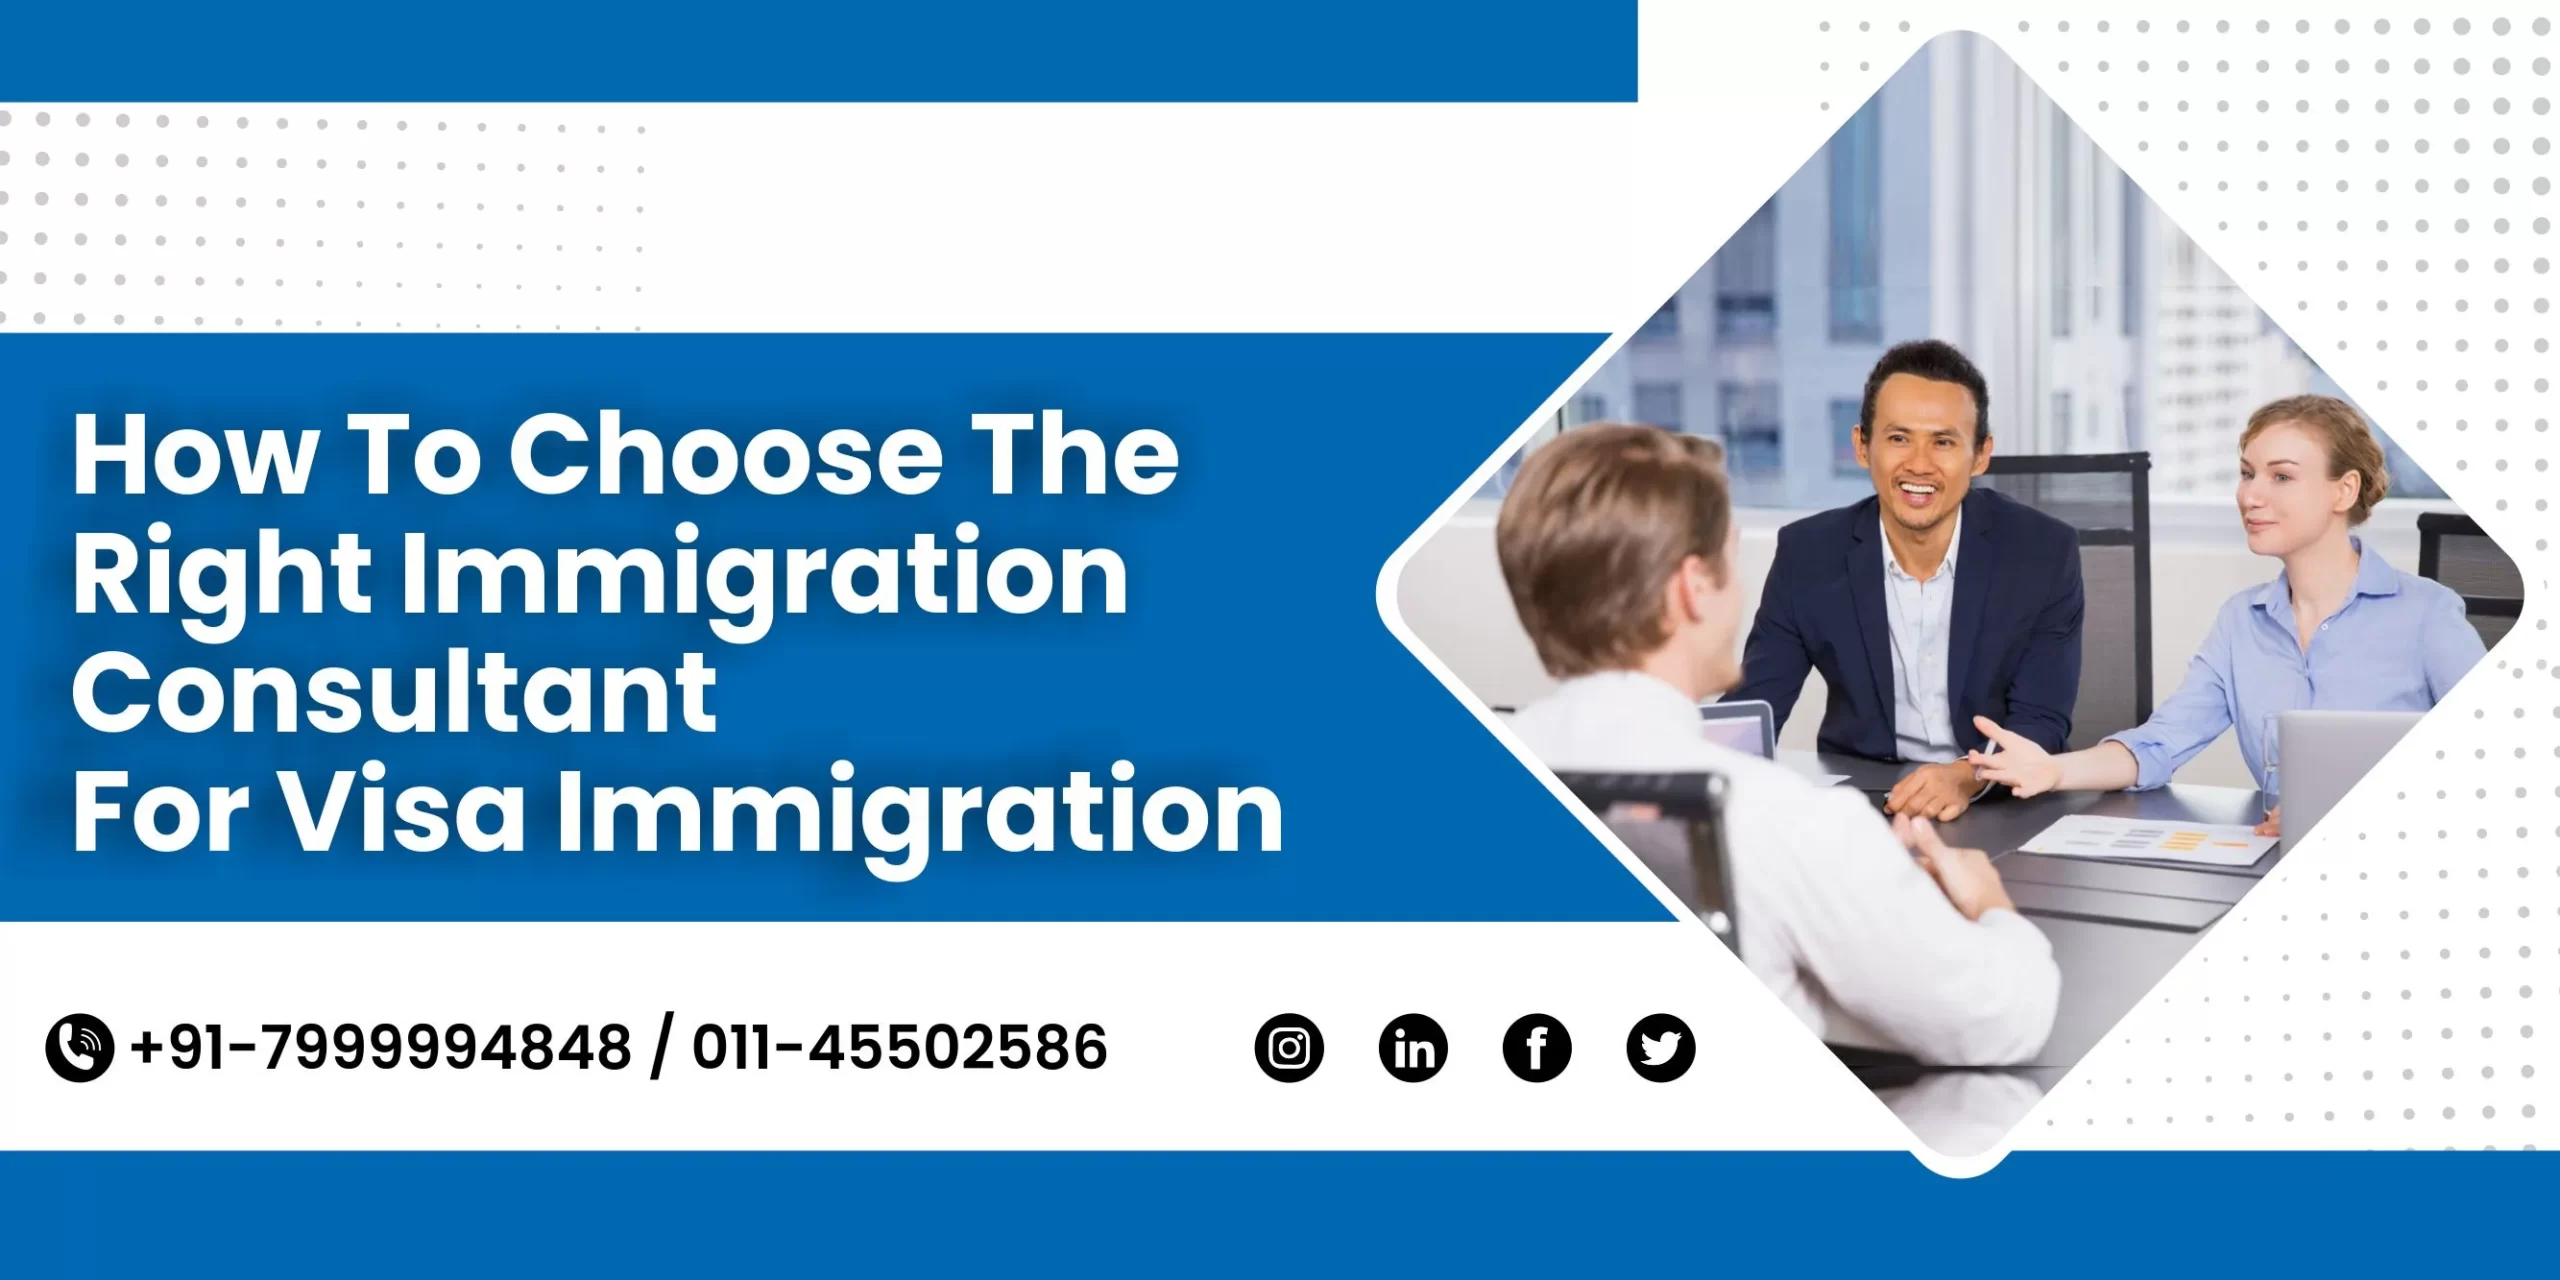 How to Choose the Right Immigration Consultants for Visa Application